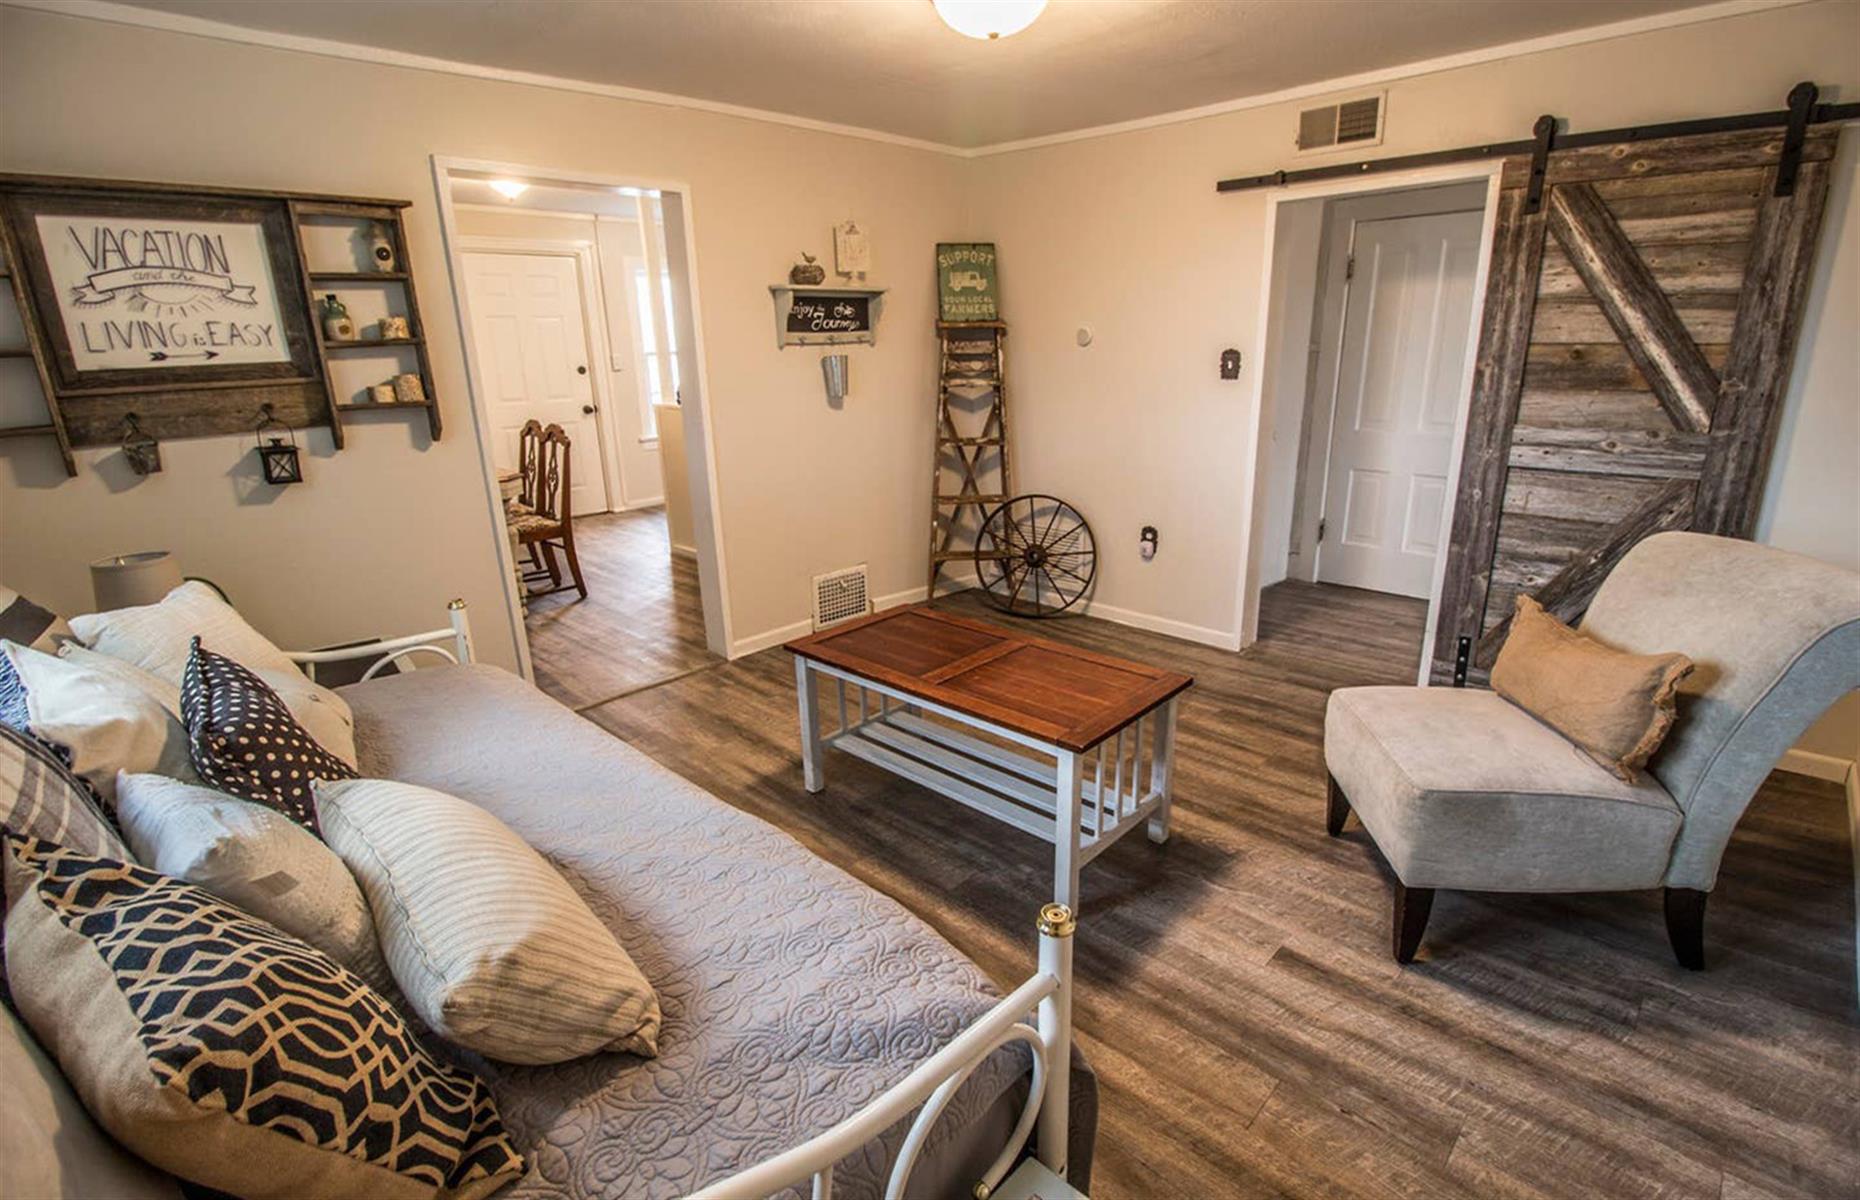 <p>Visitors can embrace country chic in this gorgeous downtown farmhouse. The <a href="https://www.airbnb.co.uk/rooms/28487099">one-bedroom home</a> is located just off the highway, and is a short bike ride (complimentary bikes courtesy of the owners) from Omaha's Old Market. The deck is perfect for romantic dinners while the master bedroom features a comfy king size bed, too. Available from $68 a night, this farmhouse home grants easy access of all the top Omaha spots, including <a href="http://www.omahazoo.com/">the zoo</a> (you can make a timed booking up to eight days before you visit) and <a href="https://www.blackstonedistrict.com/">the Blackstone District</a>. </p>